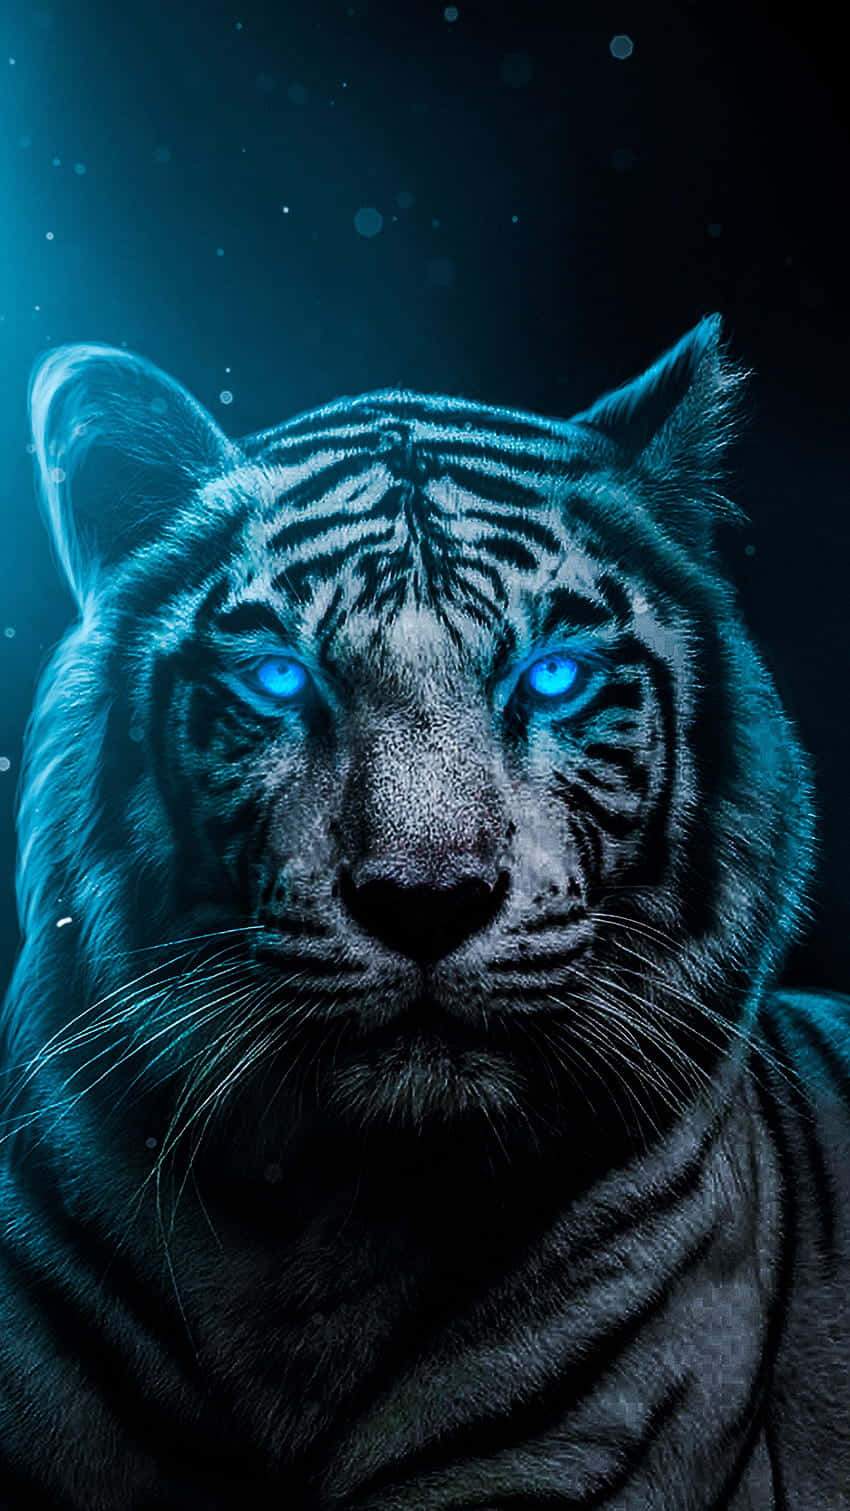 A White Tiger With Blue Eyes In The Dark Wallpaper